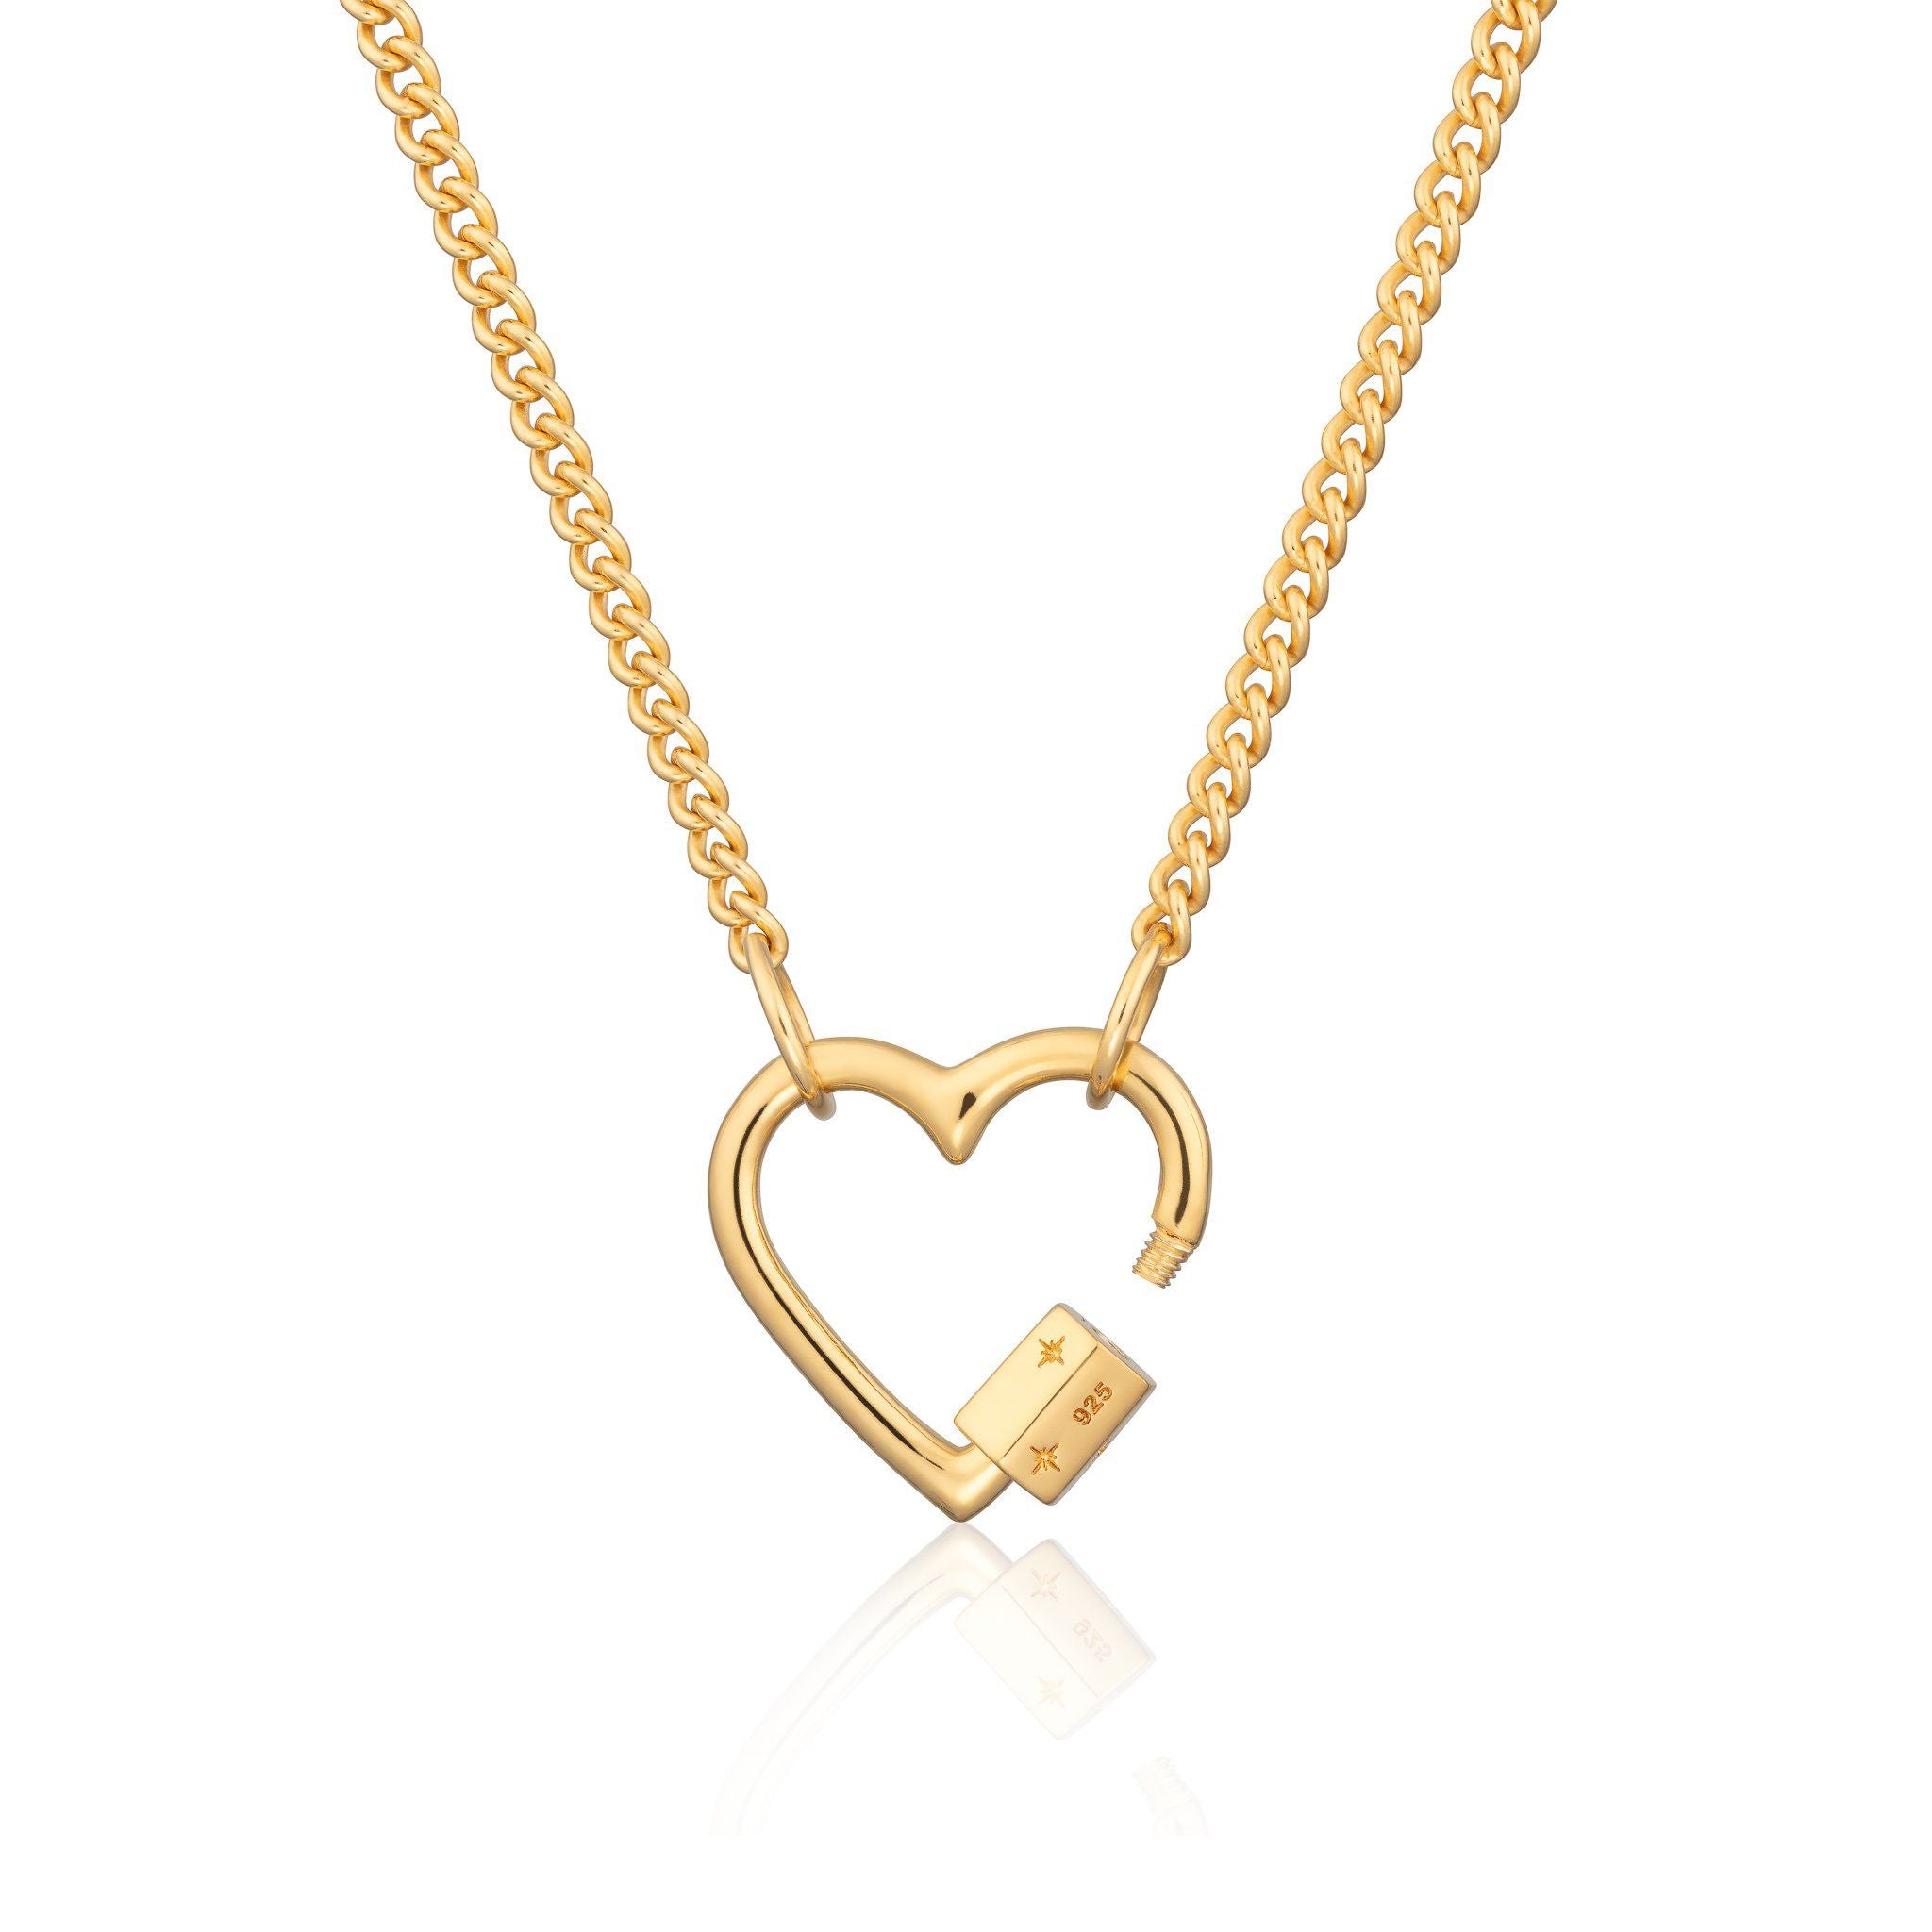 FLOLA Gold Plated Heart Necklace For Women Carabiner Lock Lightning Bolt  Necklace Zirconia Copper Punk Statement Jewelry nker30